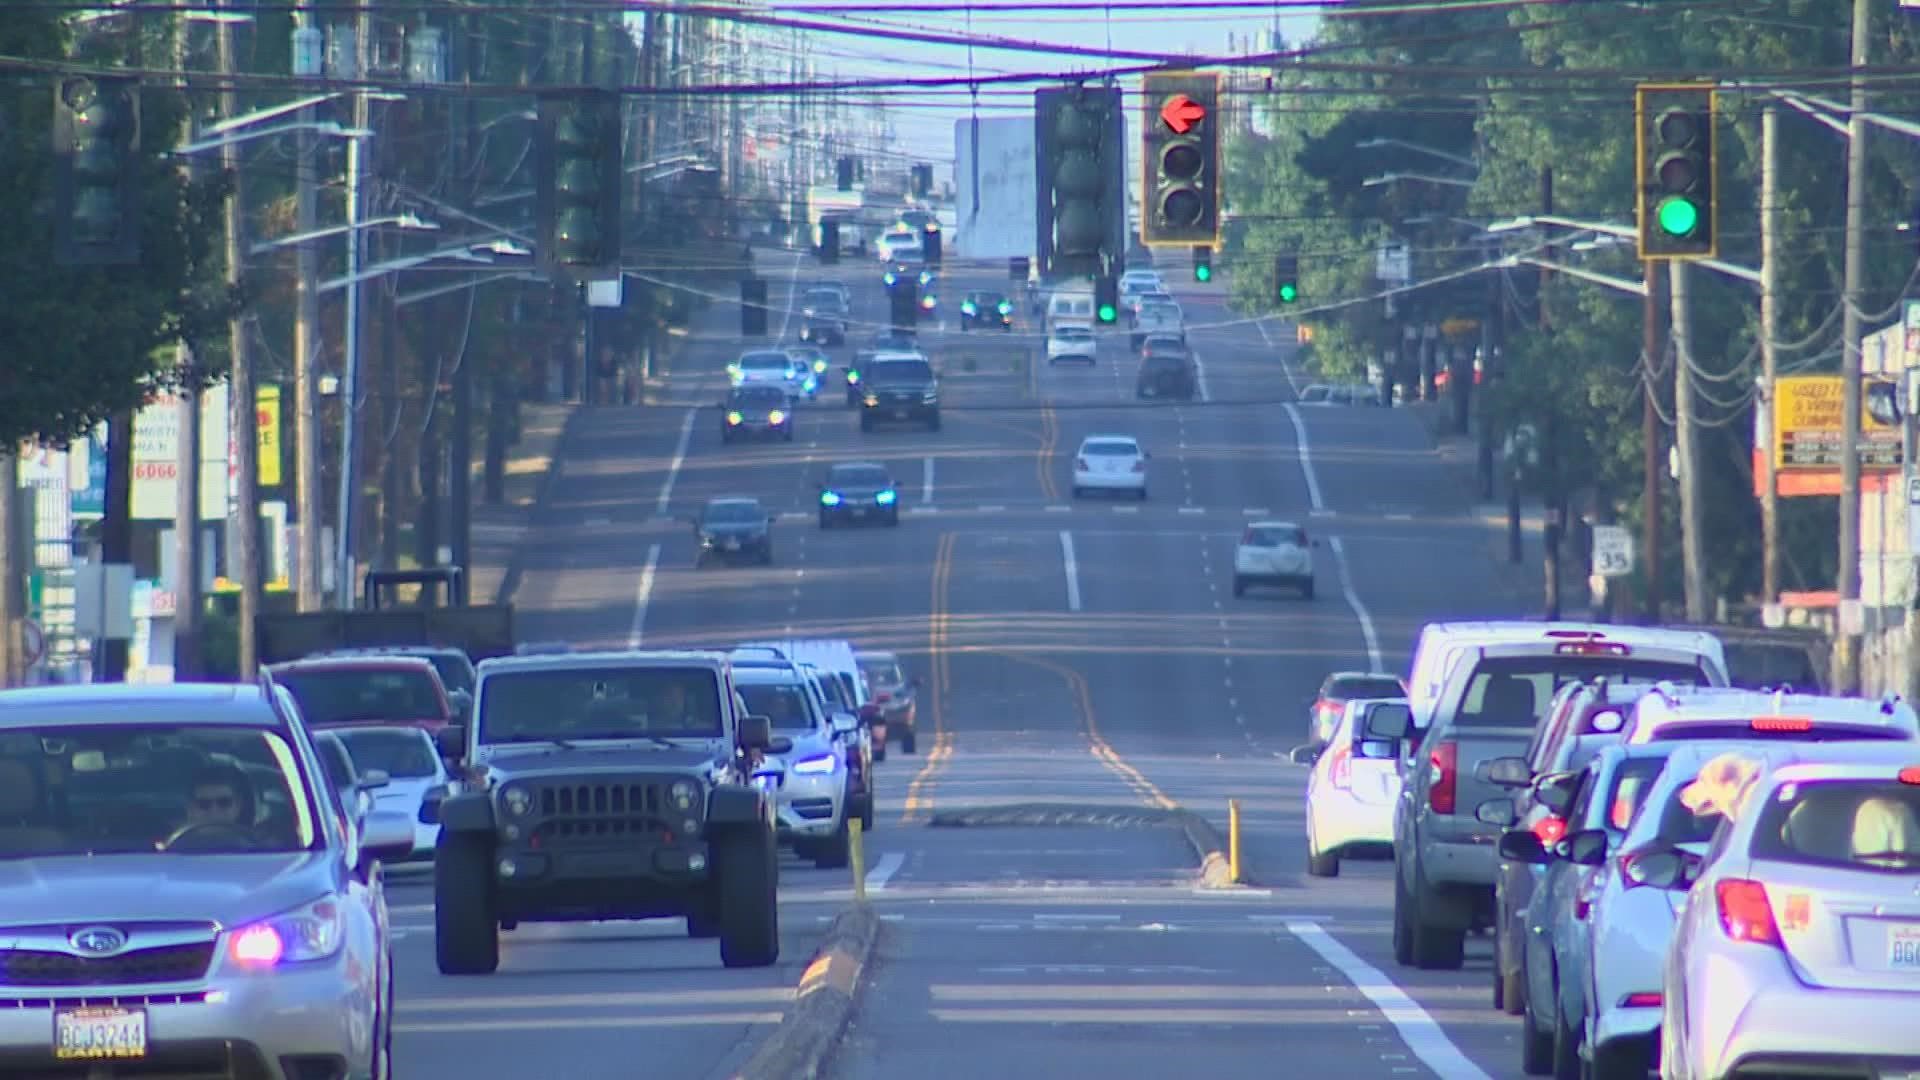 Harrell's proposed budget sets aside $8 million for Vision Zero, the city's effort to end traffic deaths on some of its busiest streets.